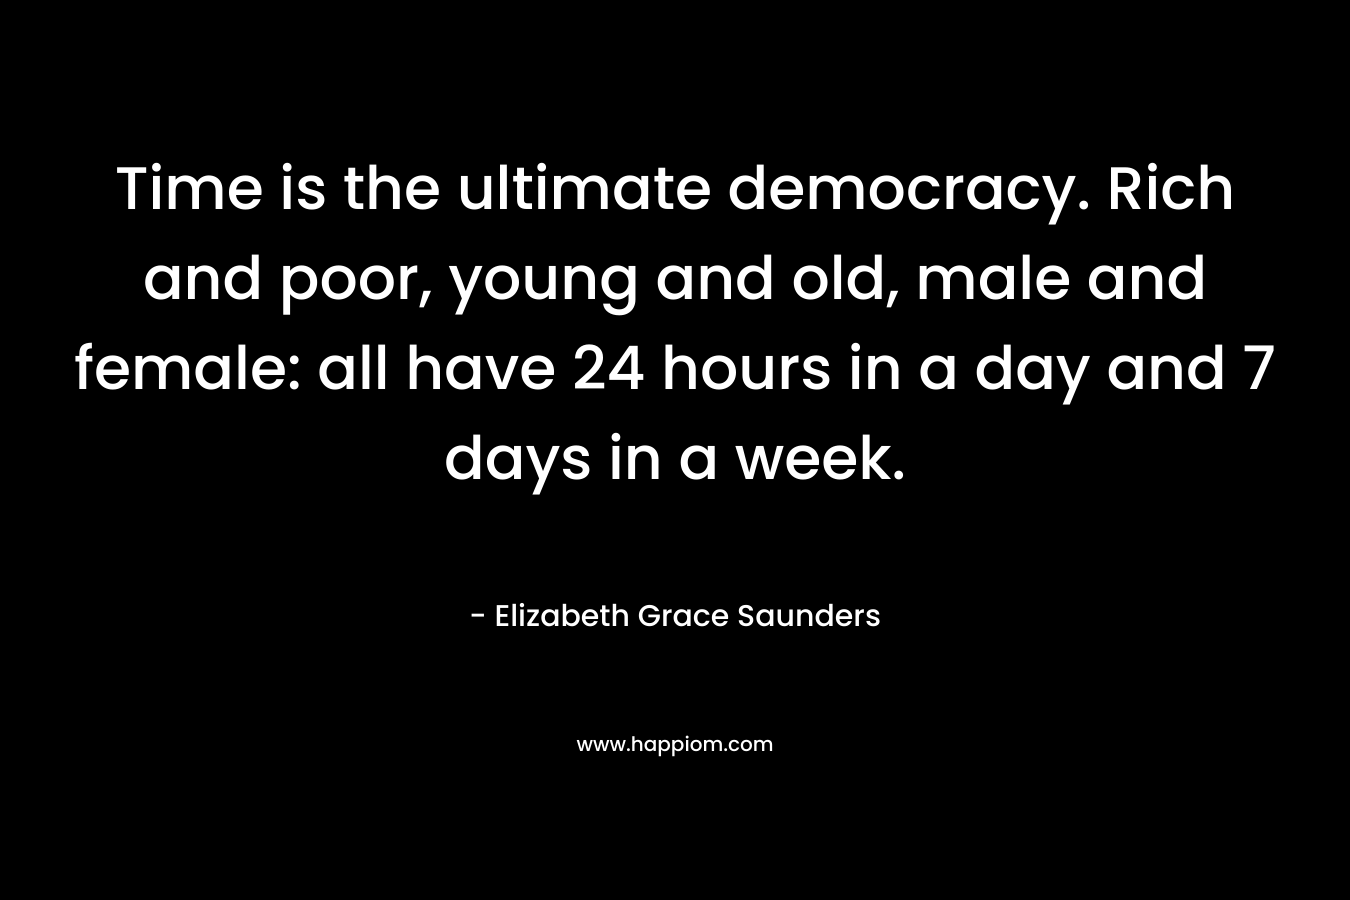 Time is the ultimate democracy. Rich and poor, young and old, male and female: all have 24 hours in a day and 7 days in a week. – Elizabeth Grace Saunders